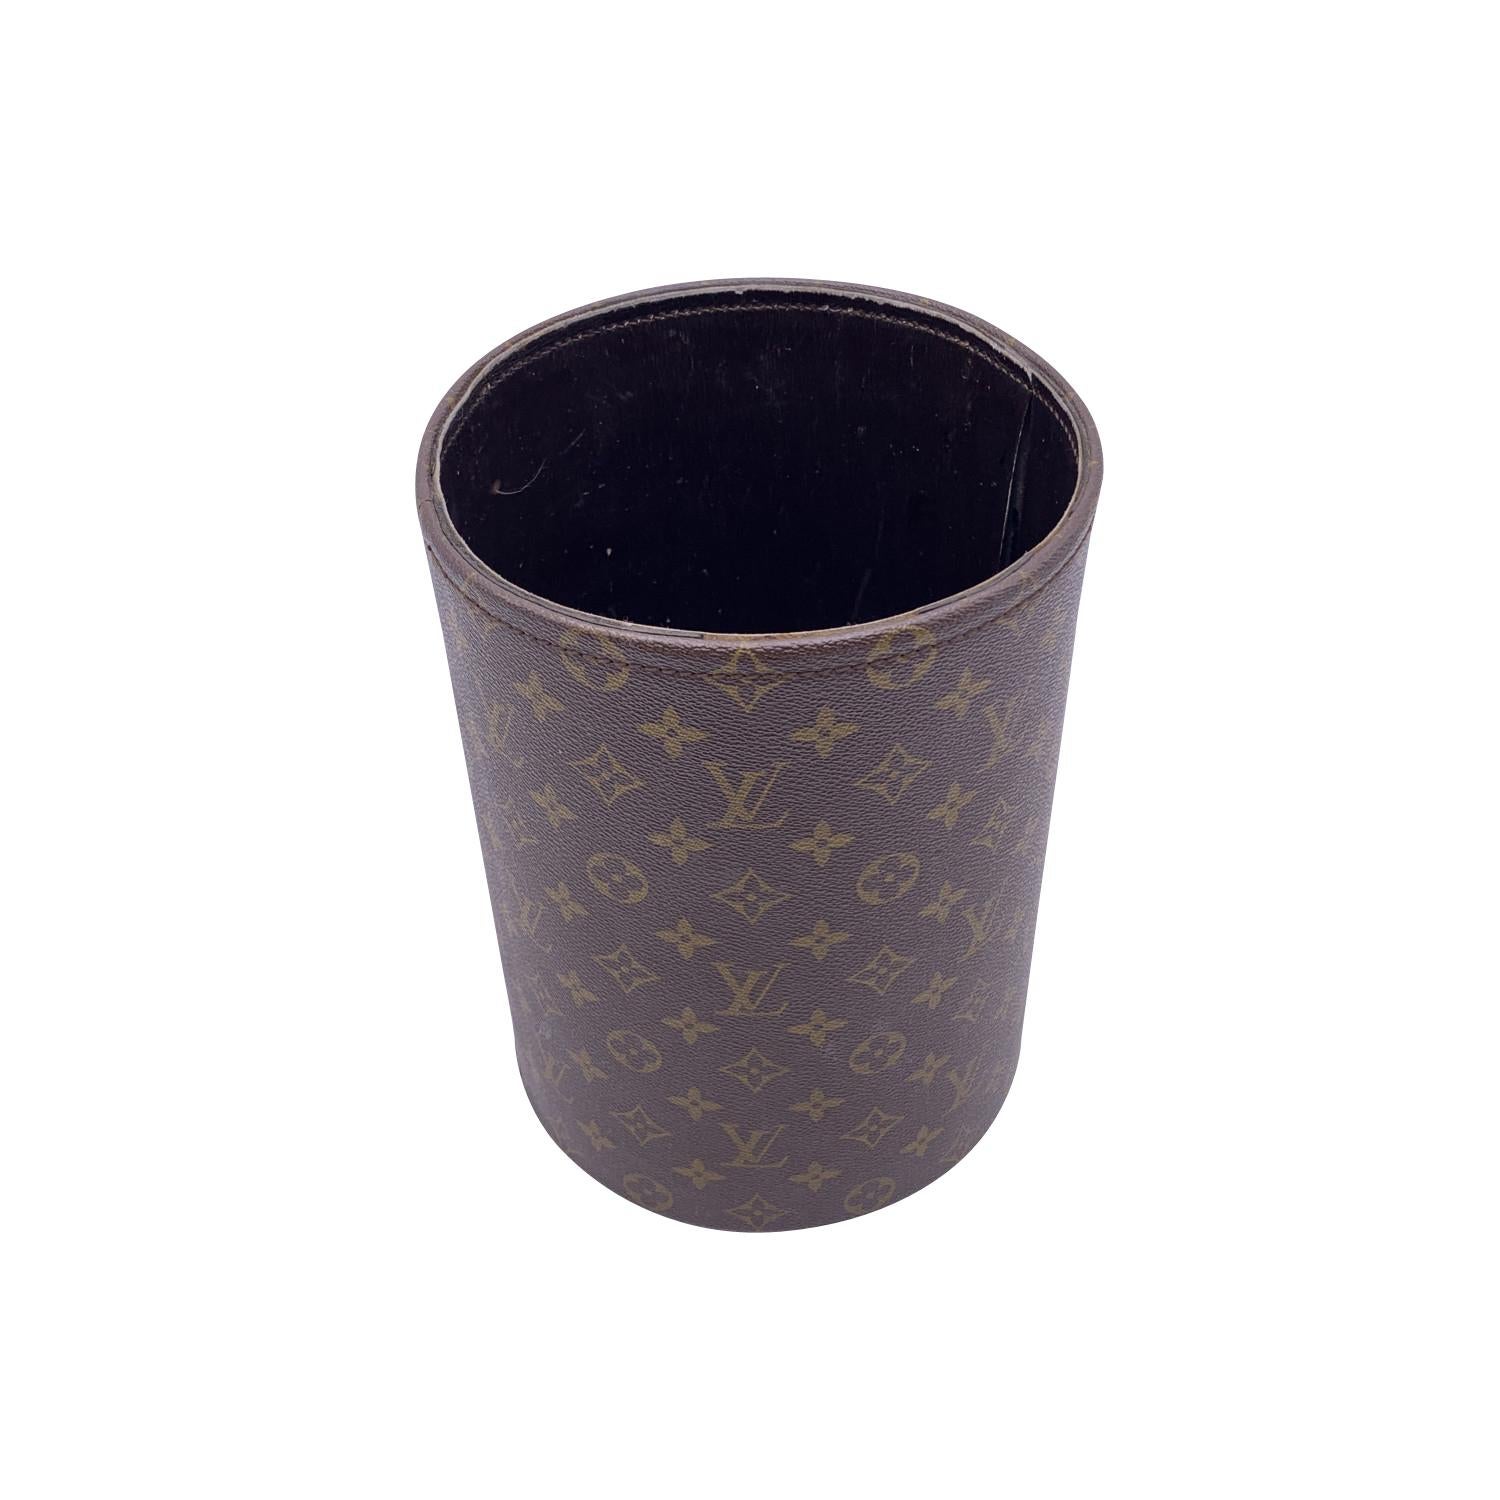 Rare vintage Louis Vuitton office waste paper basket/bin in Monogram canvas. Brown leather bottom and brown leather lining. 'Louis Vuitton Paris - Made in France' engraved internally. '822' serial number engraved on the bottom.

Details

MATERIAL: